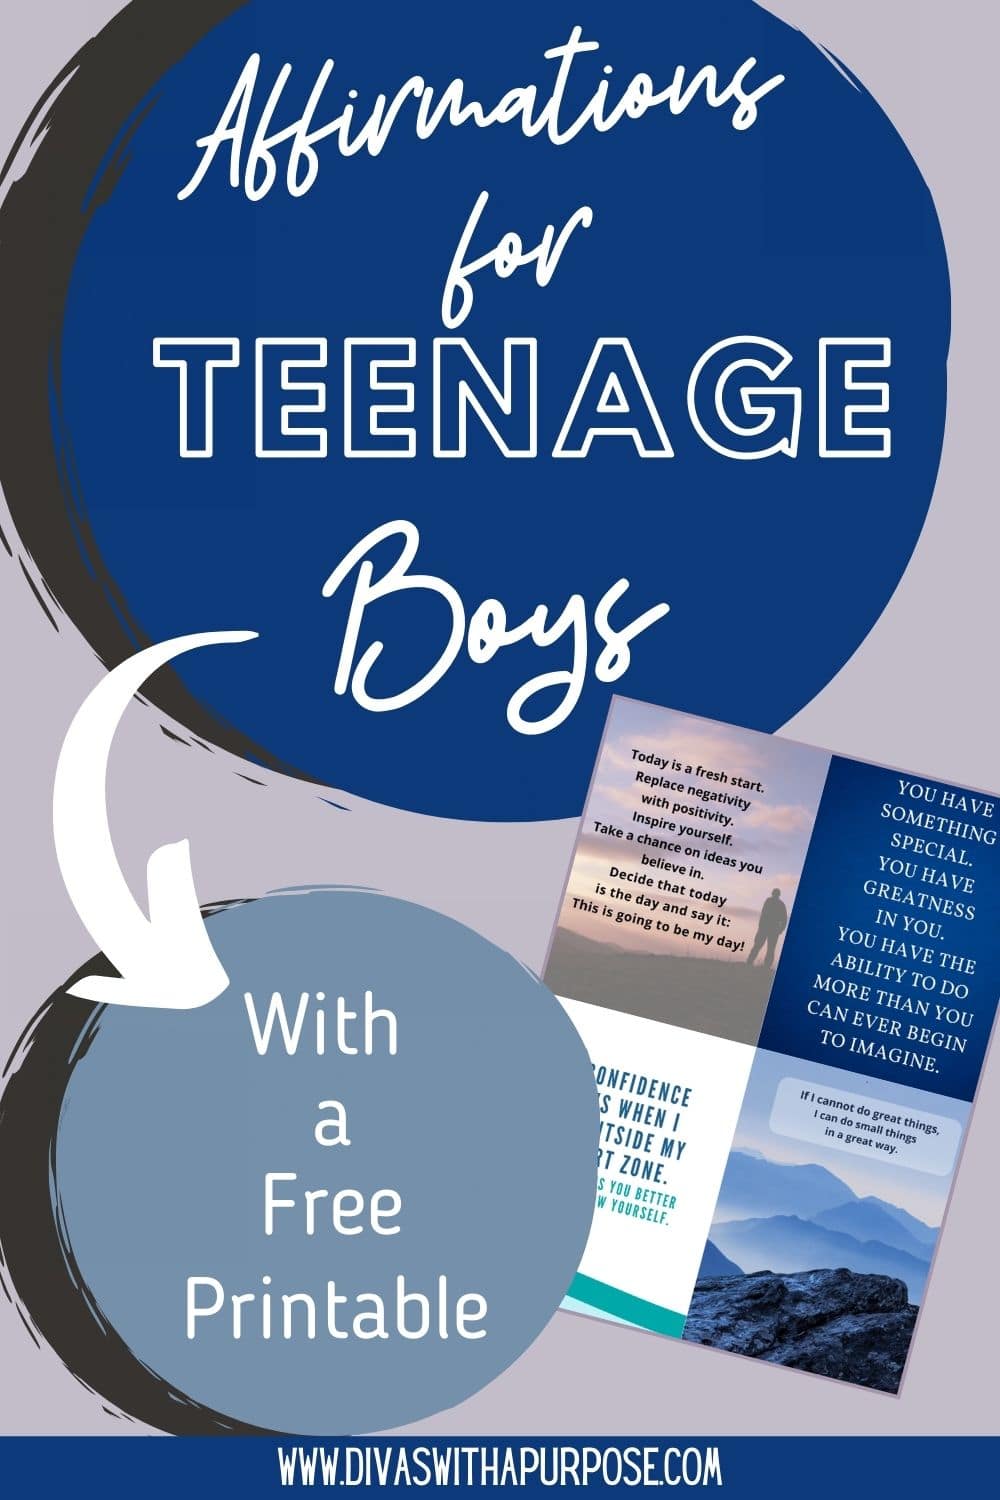 This article shares simple affirmations for our teenage sons that will help instill confidence and positive self-talk.